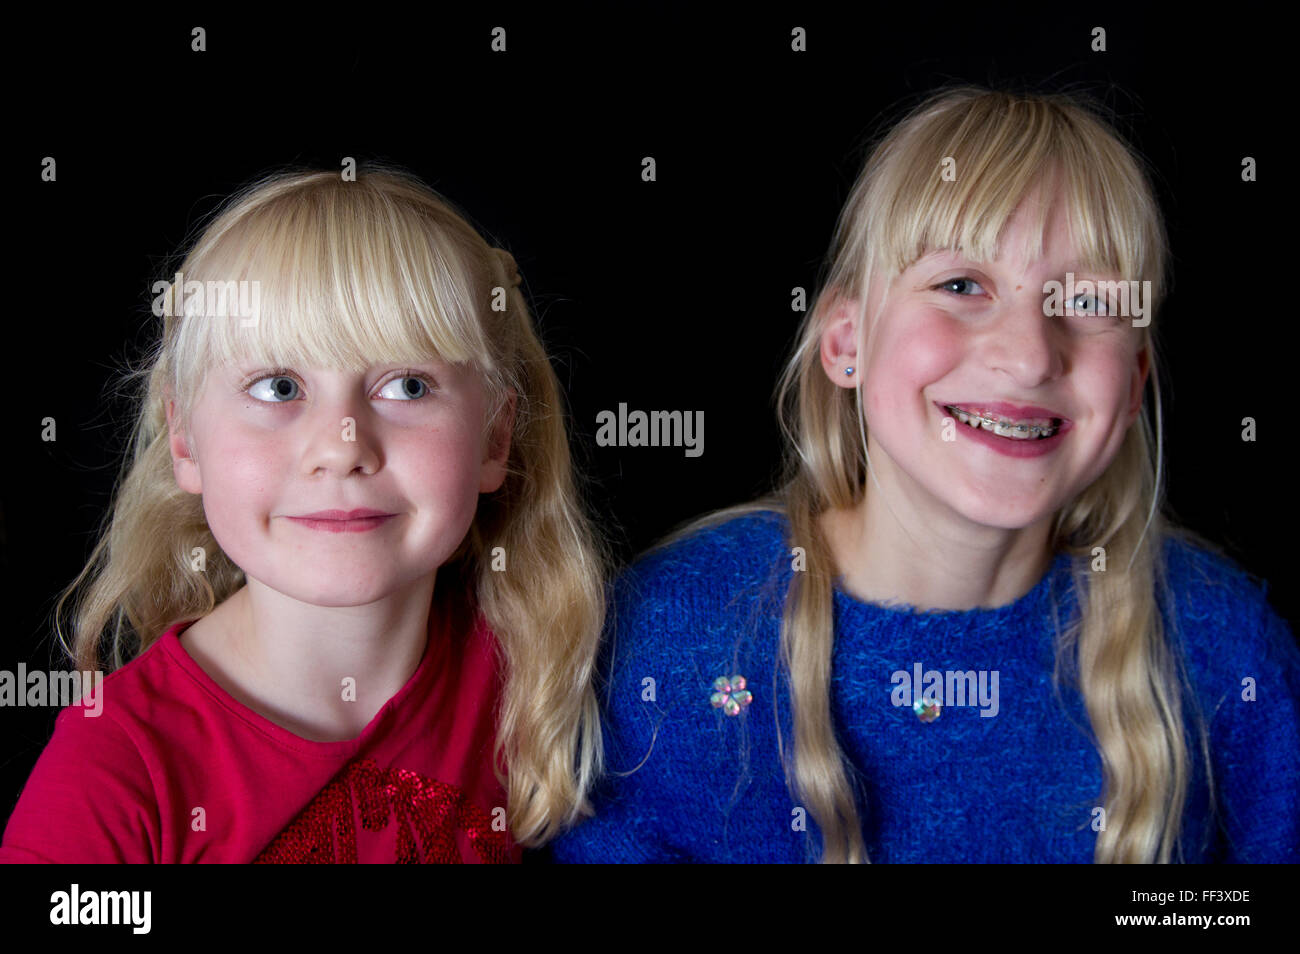 Studio portrait of two young, blond girls against a black background. Stock Photo